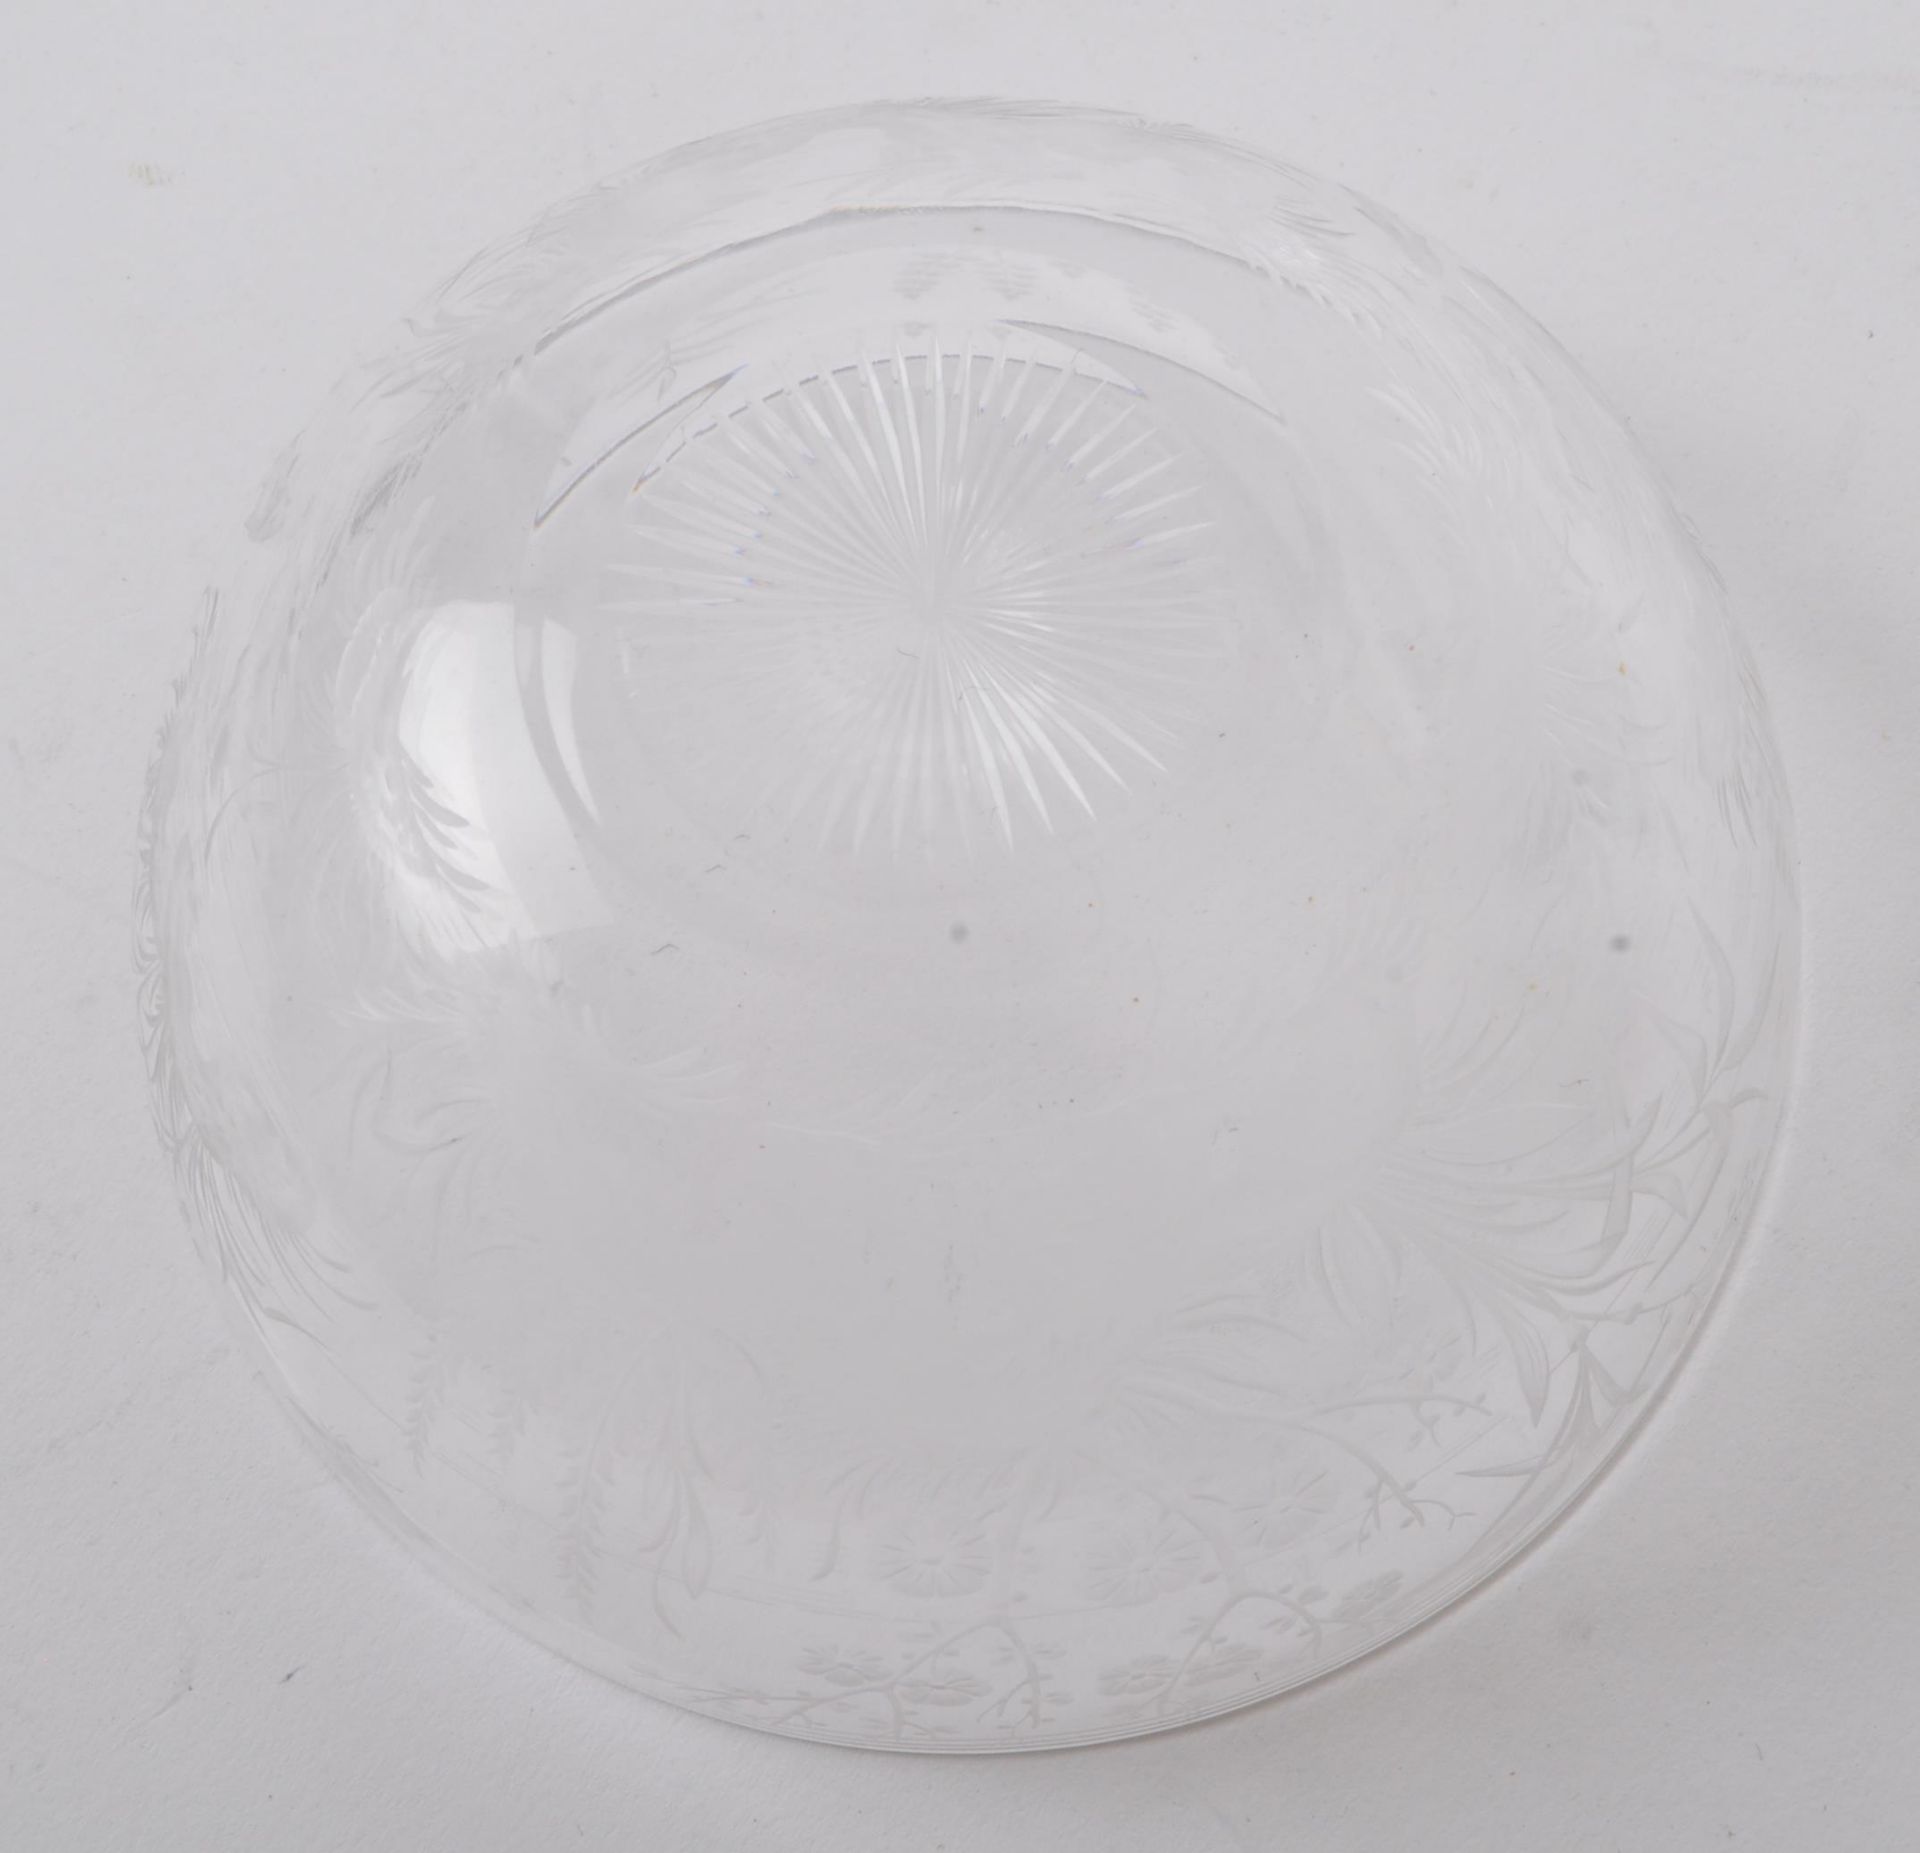 EARLY 20TH CENTURY ETCHED CHINOISERIE GLASS DISH - Image 6 of 6